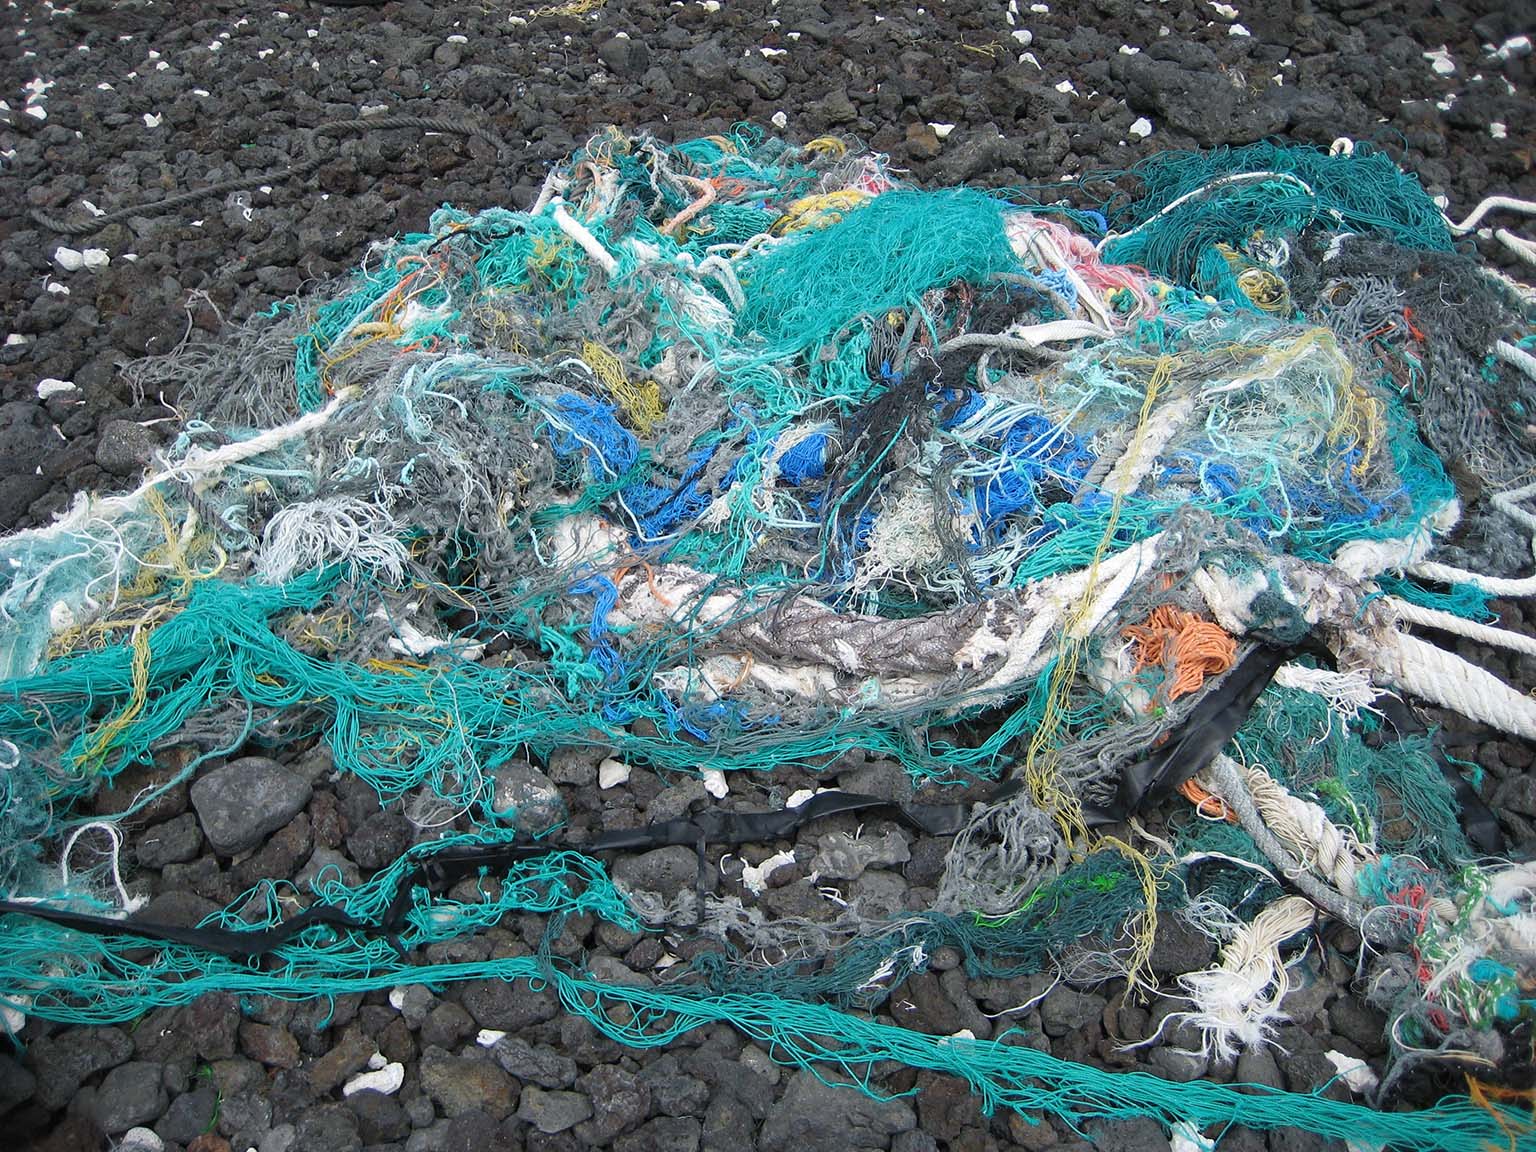 Pile of white, turquoise, and blue ghost nets on black rocks at Black Rock, Ka‘anapali Beach, Hawai‘i.